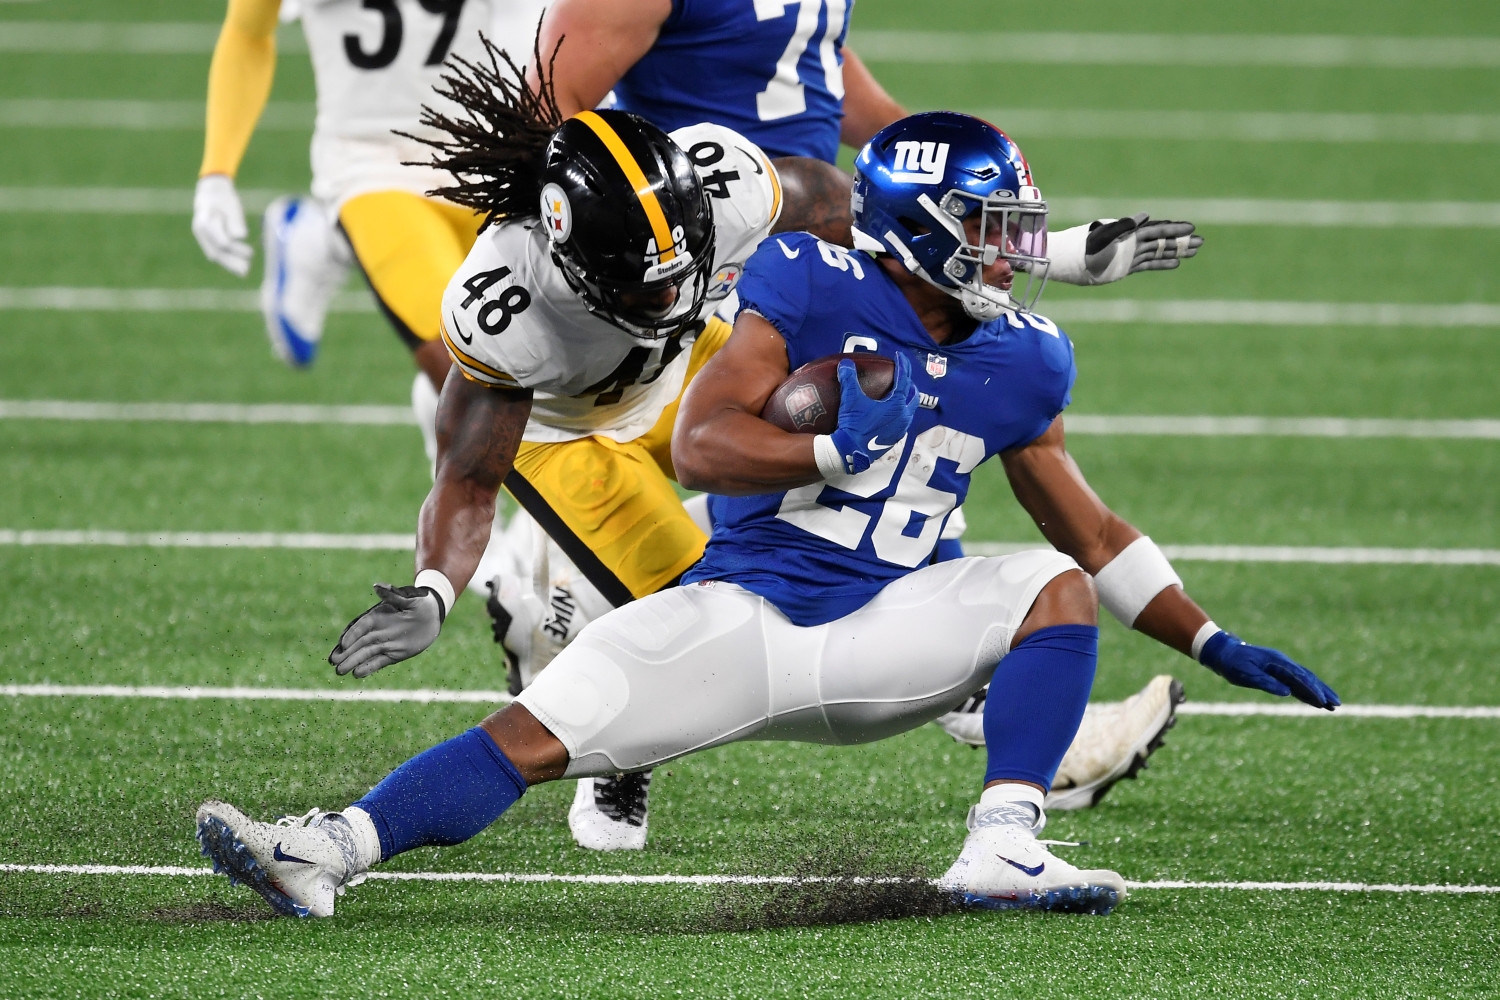 New York Giants running back Saquon Barkley gets tackled during a game against the Pittsburgh Steelers.